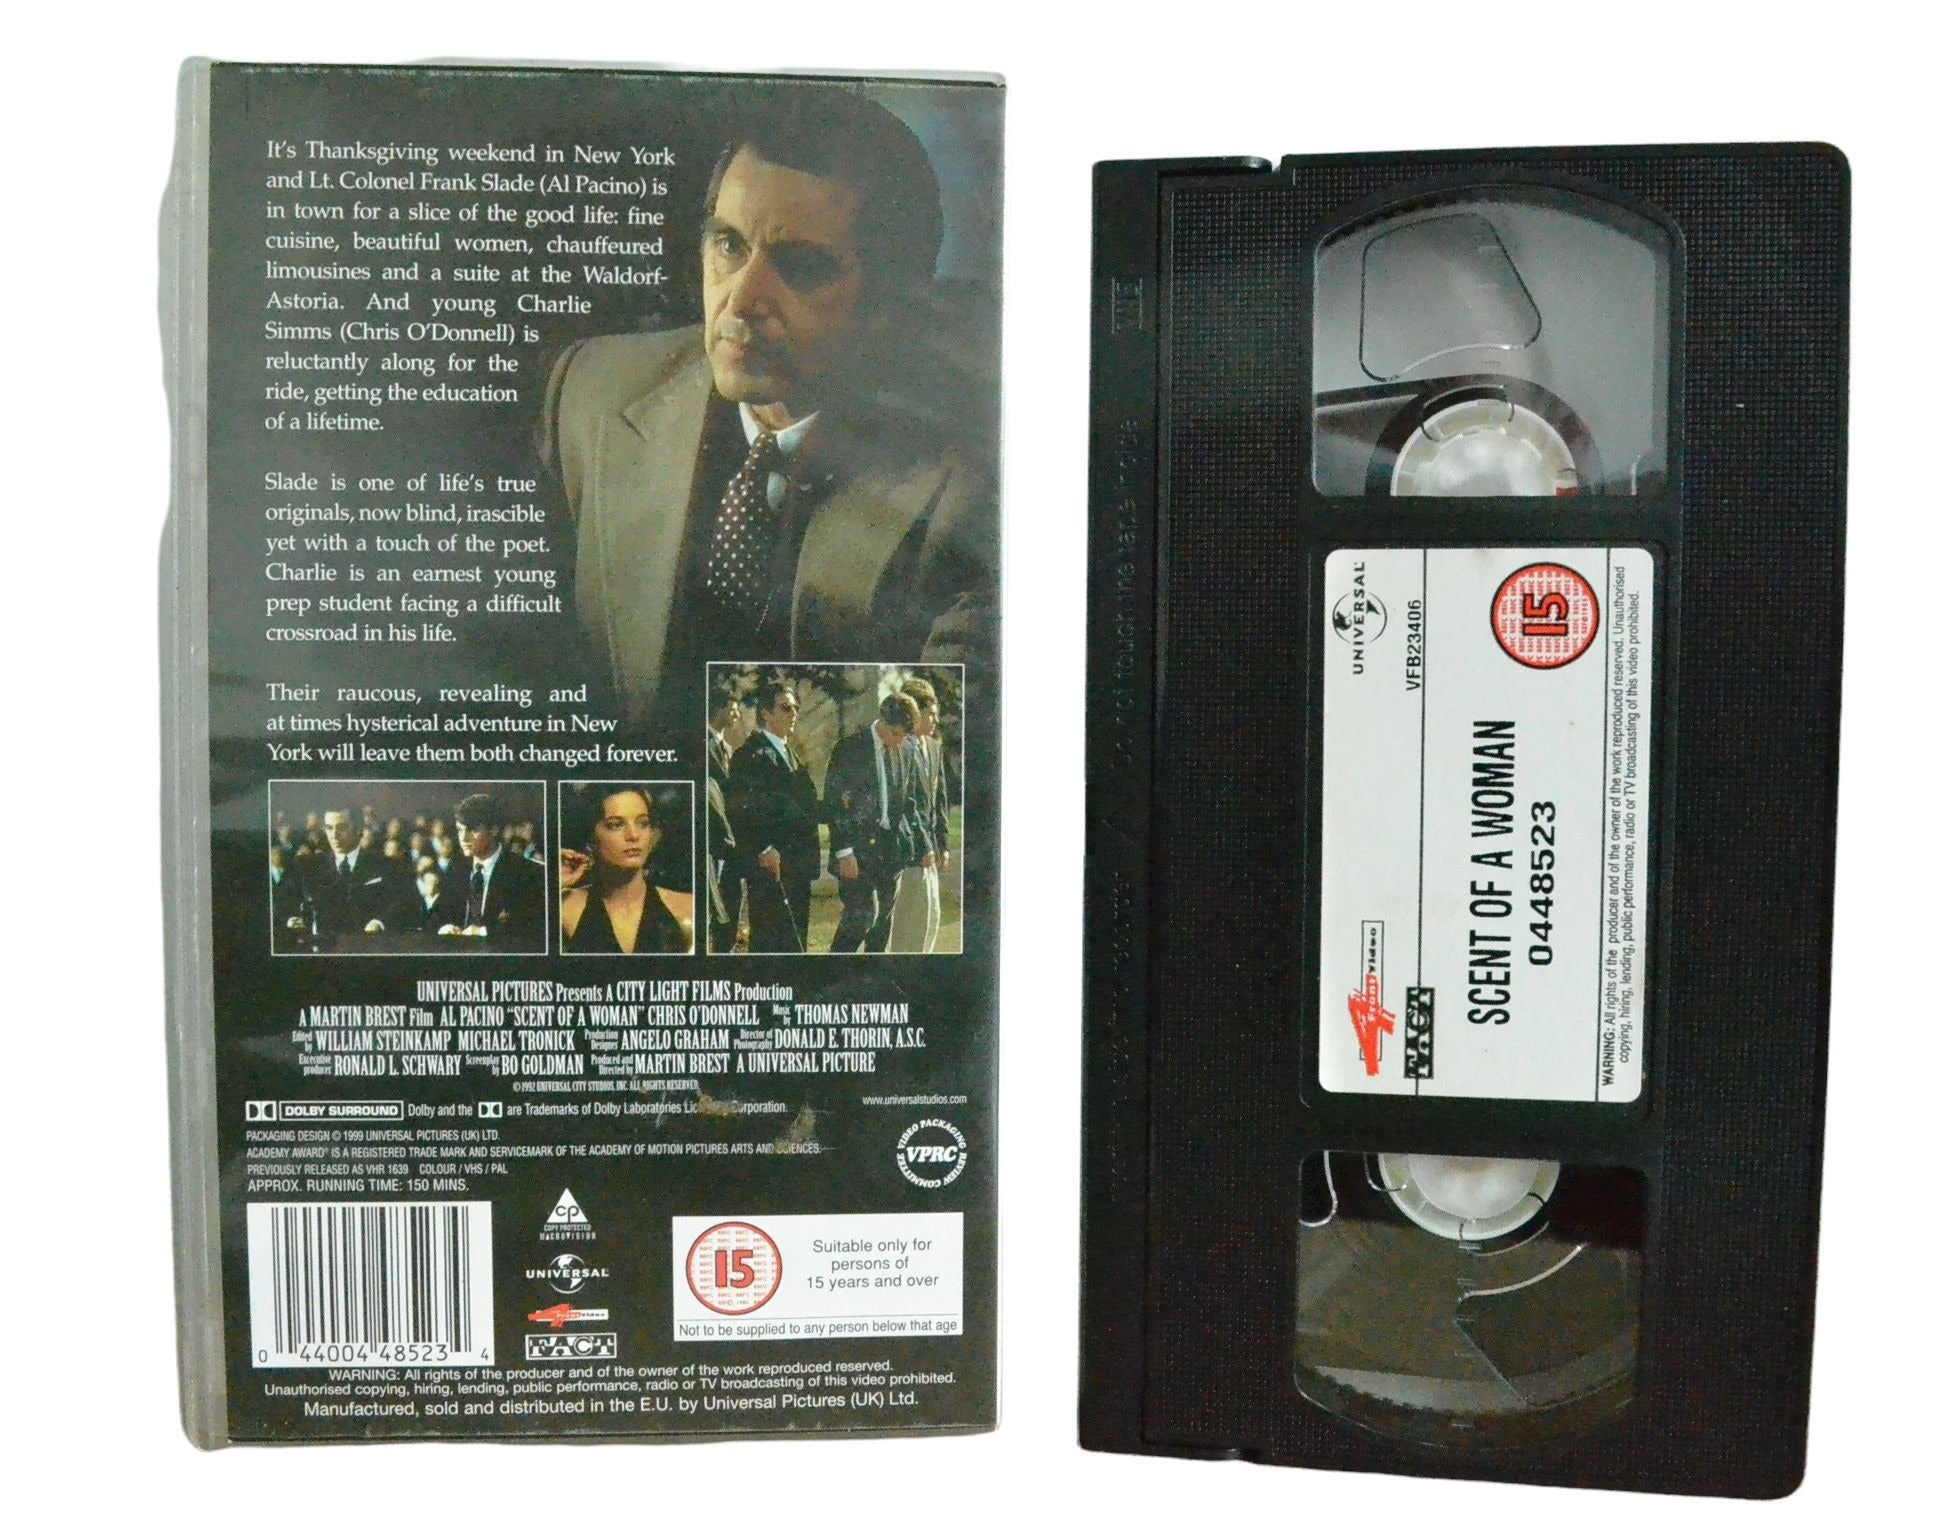 Scent Of A Woman - Al Pacino - 4Front Video - Vintage - Pal VHS-